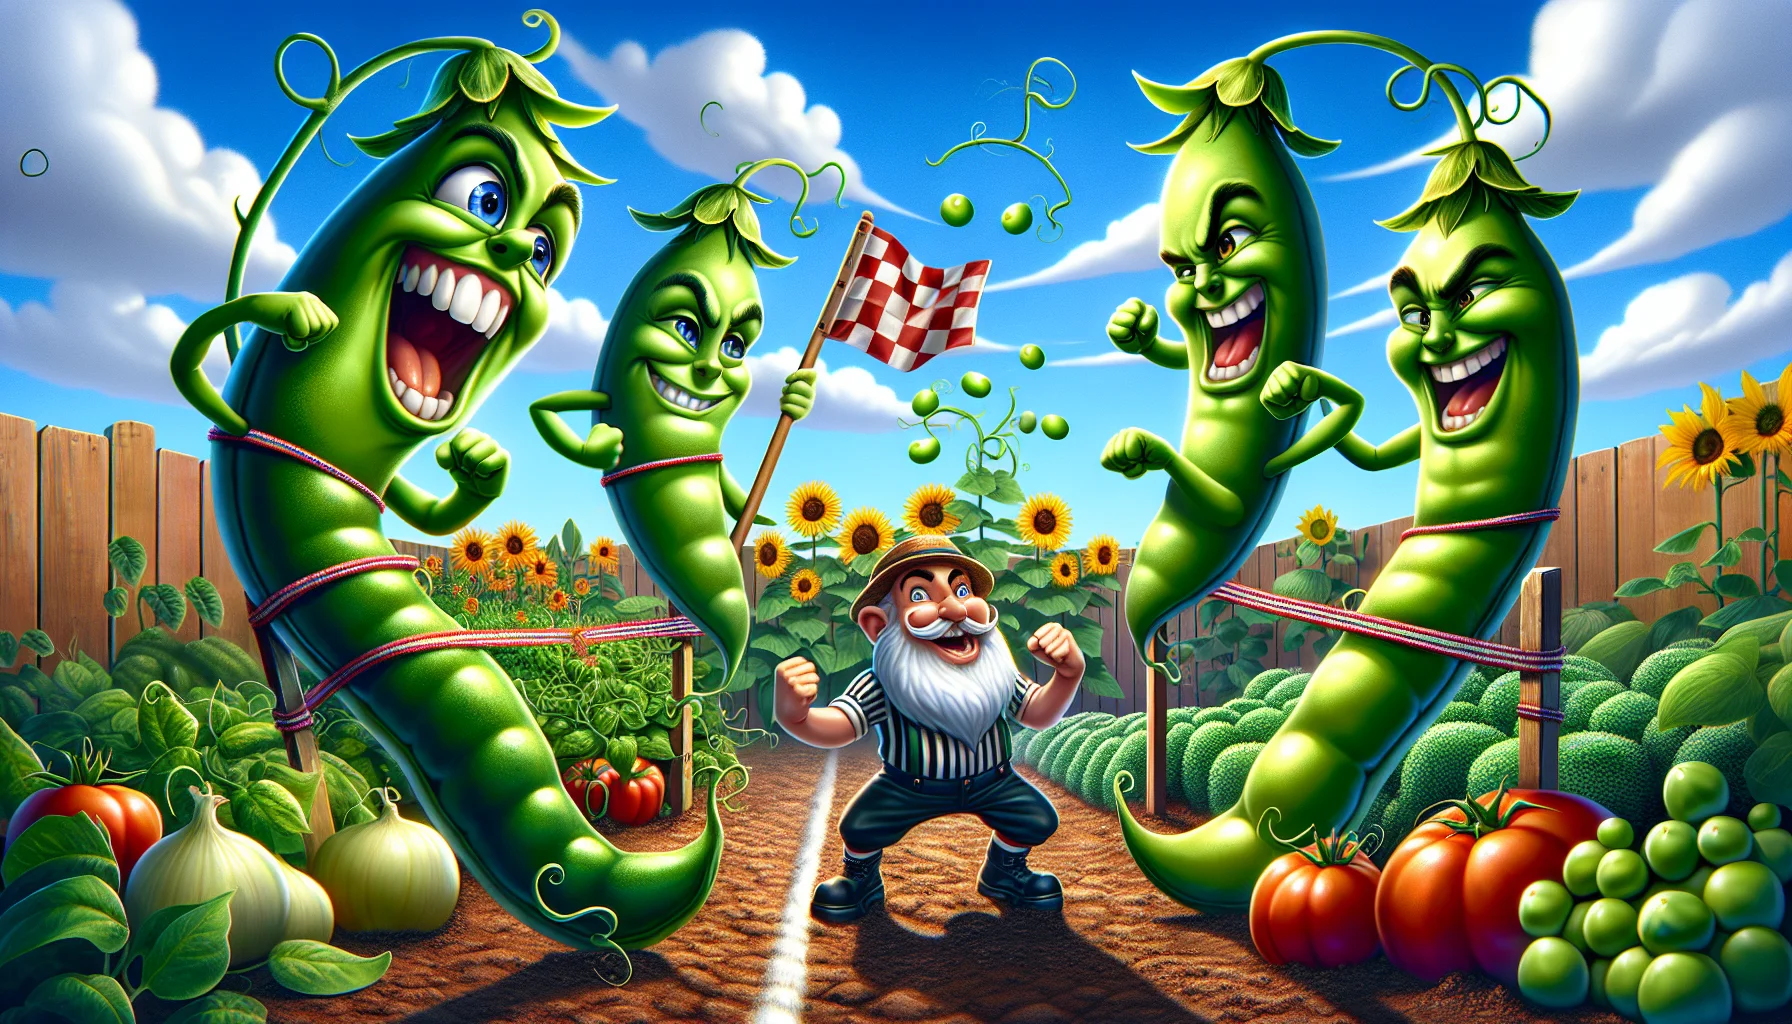 An enticing image showcasing a humorous gardening scenario. Picture an amusing competition between sweet peas and green peas, each portrayed with cartoon-like sentience. On one side, the sweet peas, grinning widely, cling to a trellis, their vines reaching high into the cloudless blue sky. On the other side, the green peas, flexing their pods, grow compact and bountiful in the enriching soil. A cheeky garden gnome referee in the middle watches the race. The garden is vibrant and sunny, filled with other fruits and vegetables, and a background of towering sunflowers. This image exudes the joy and fun of gardening.